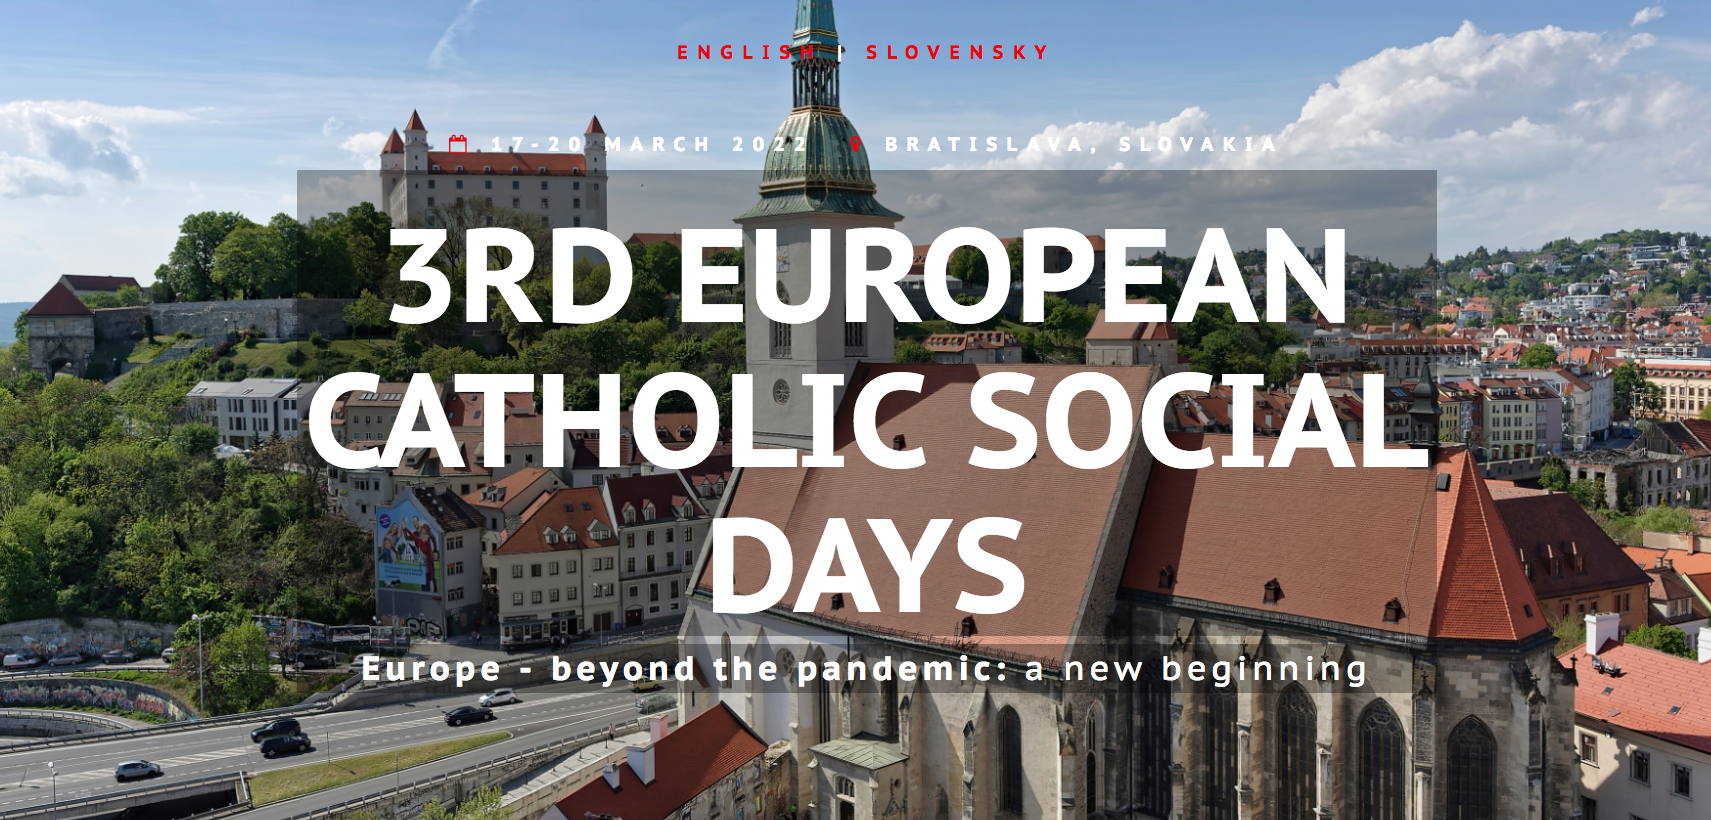 Screeshot of the official website of the 3rd European Catholic Social Days